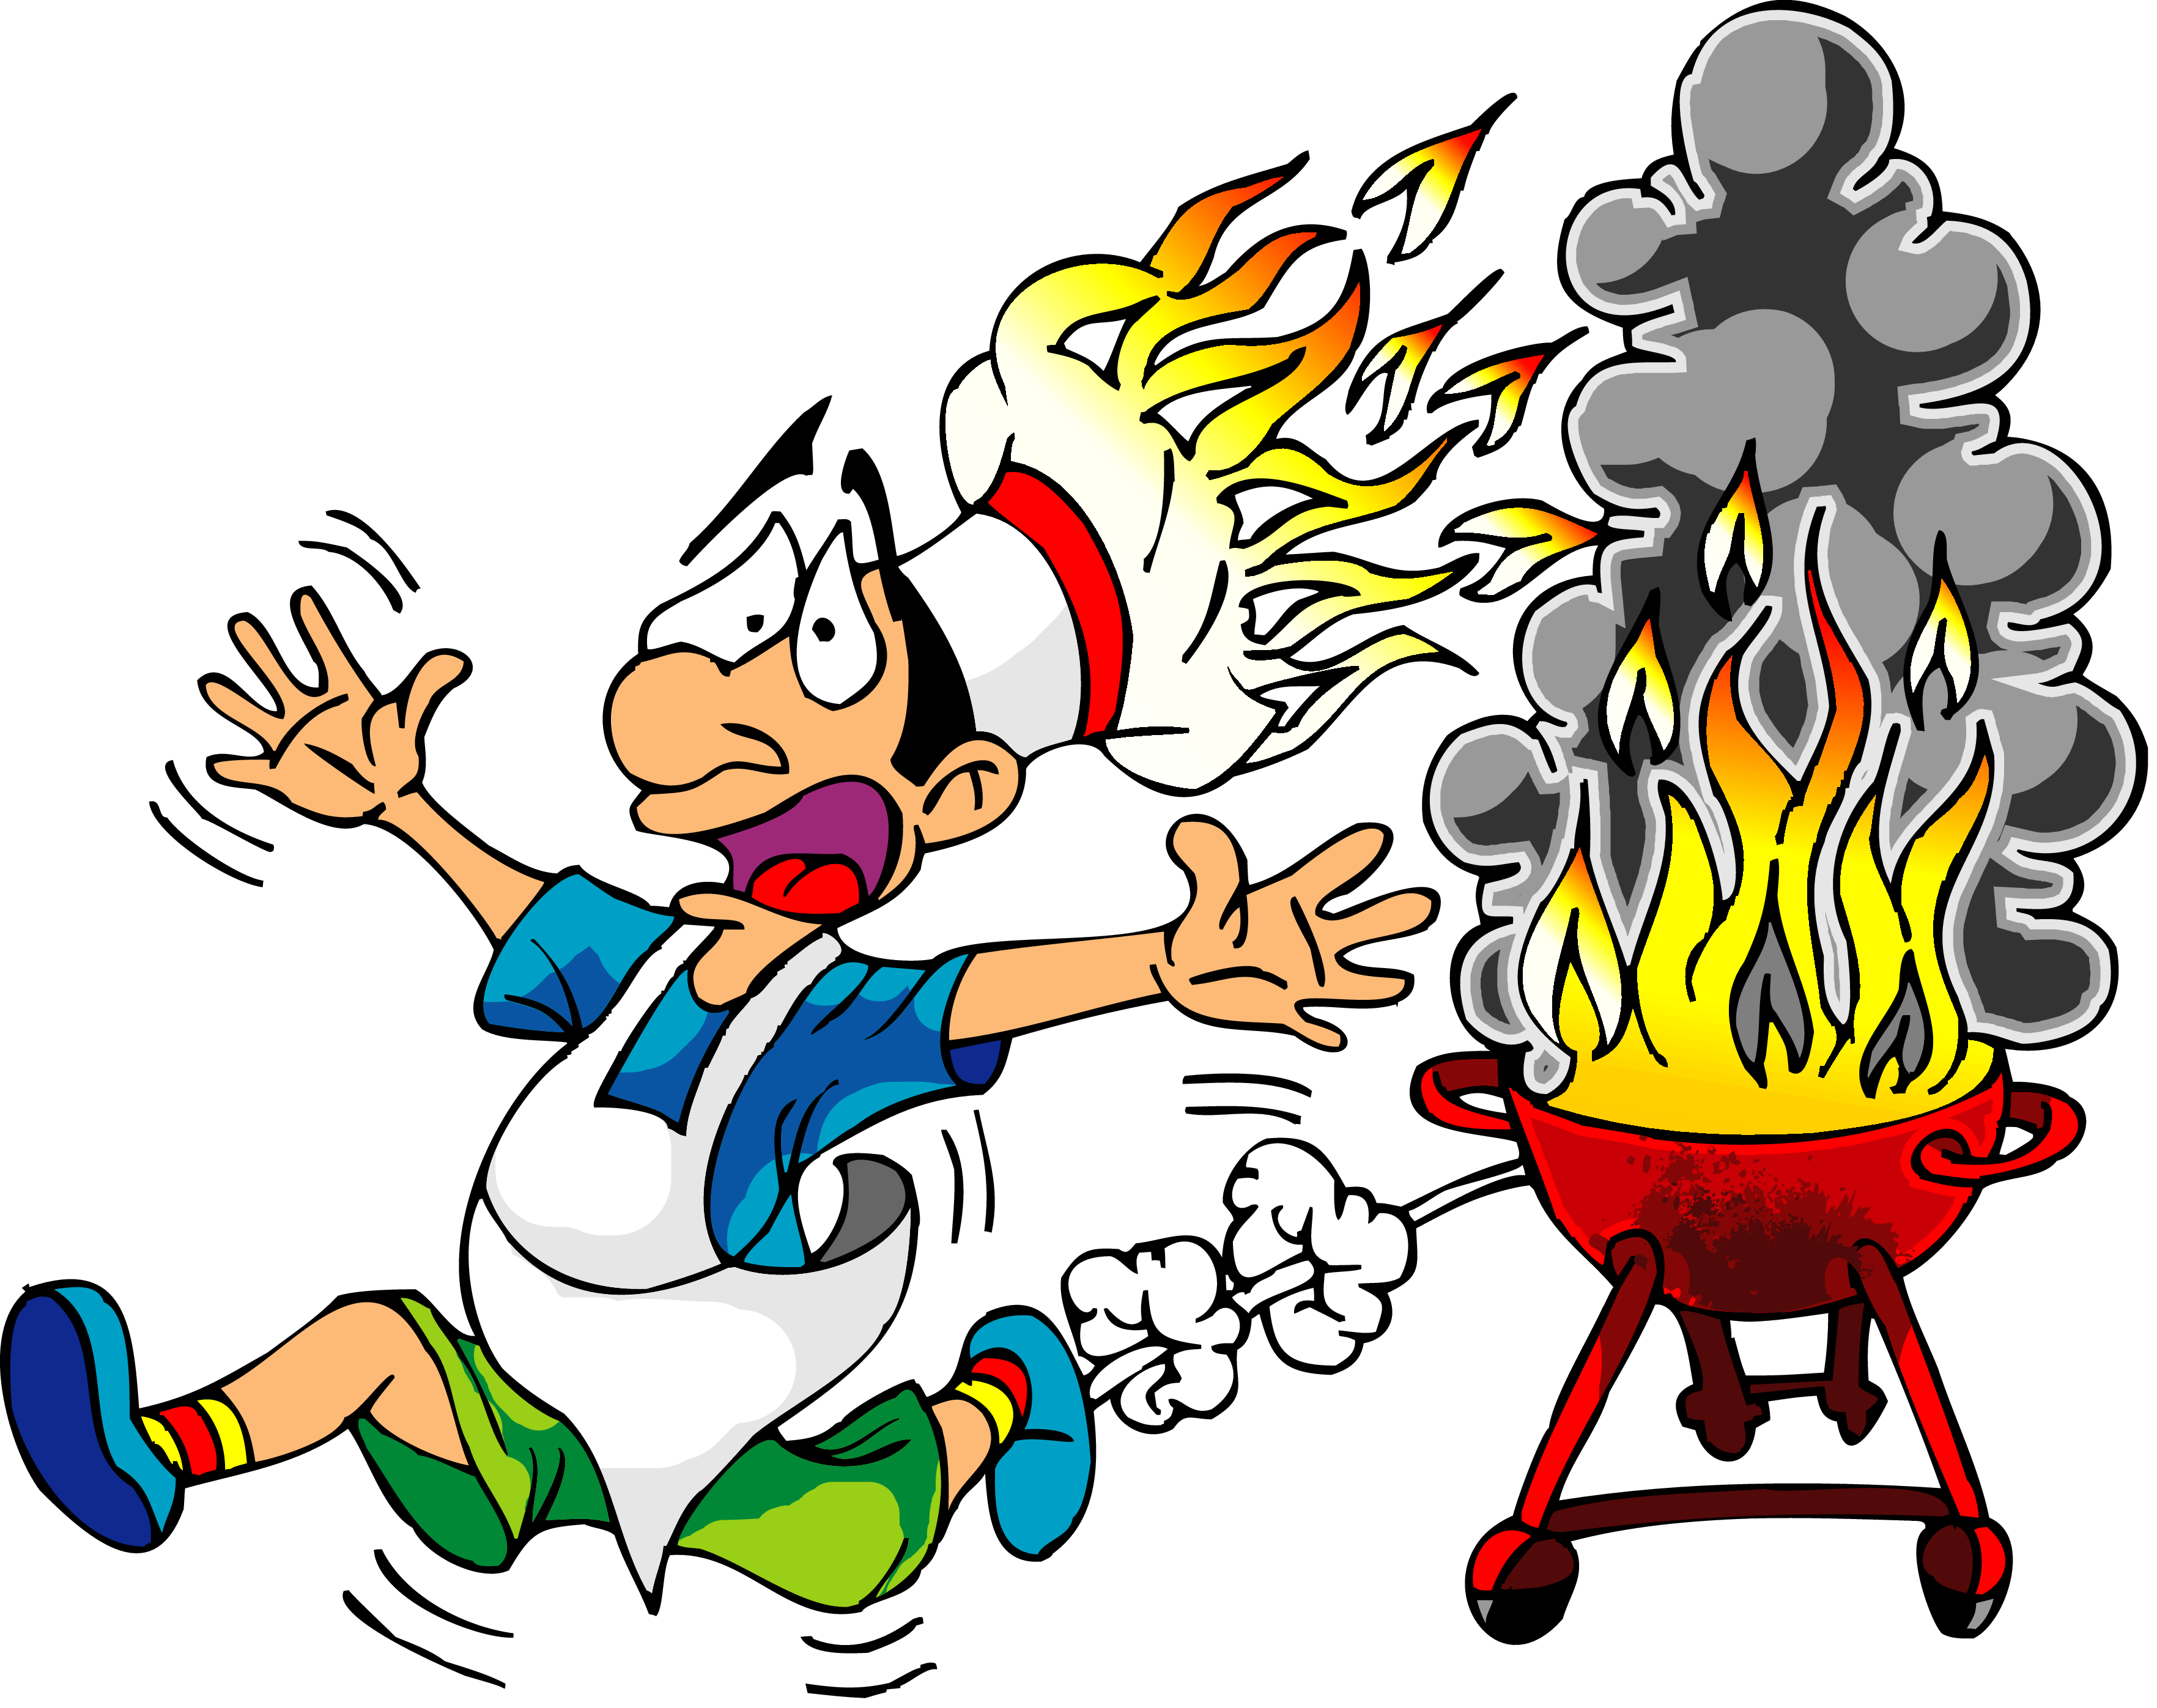 Burn baby or how. Gloves clipart catch